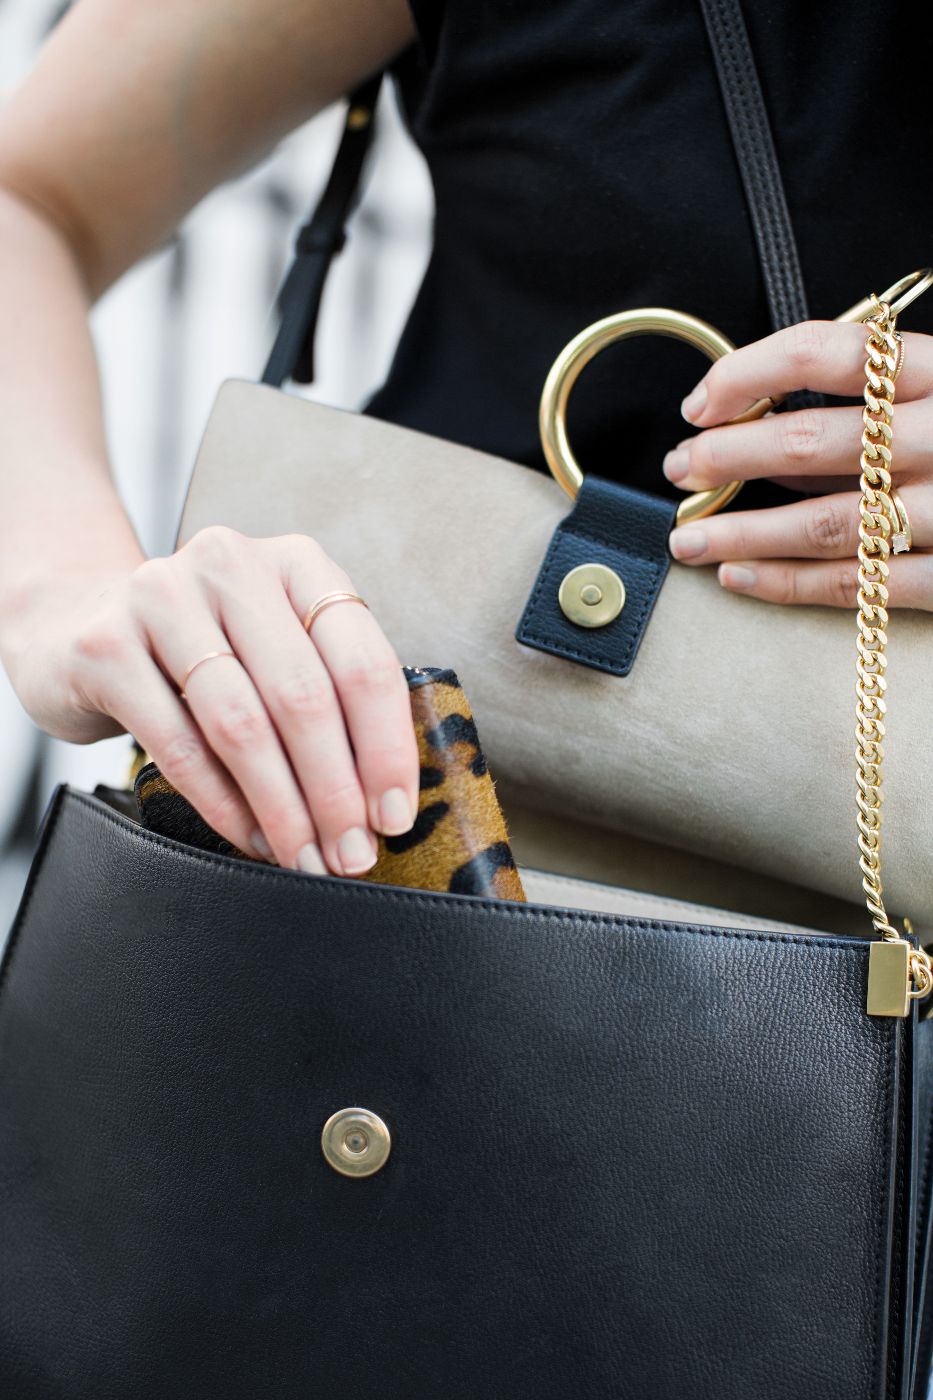 How To Make A ‘Solid’ Fancy Bag Purchase – The Anna Edit